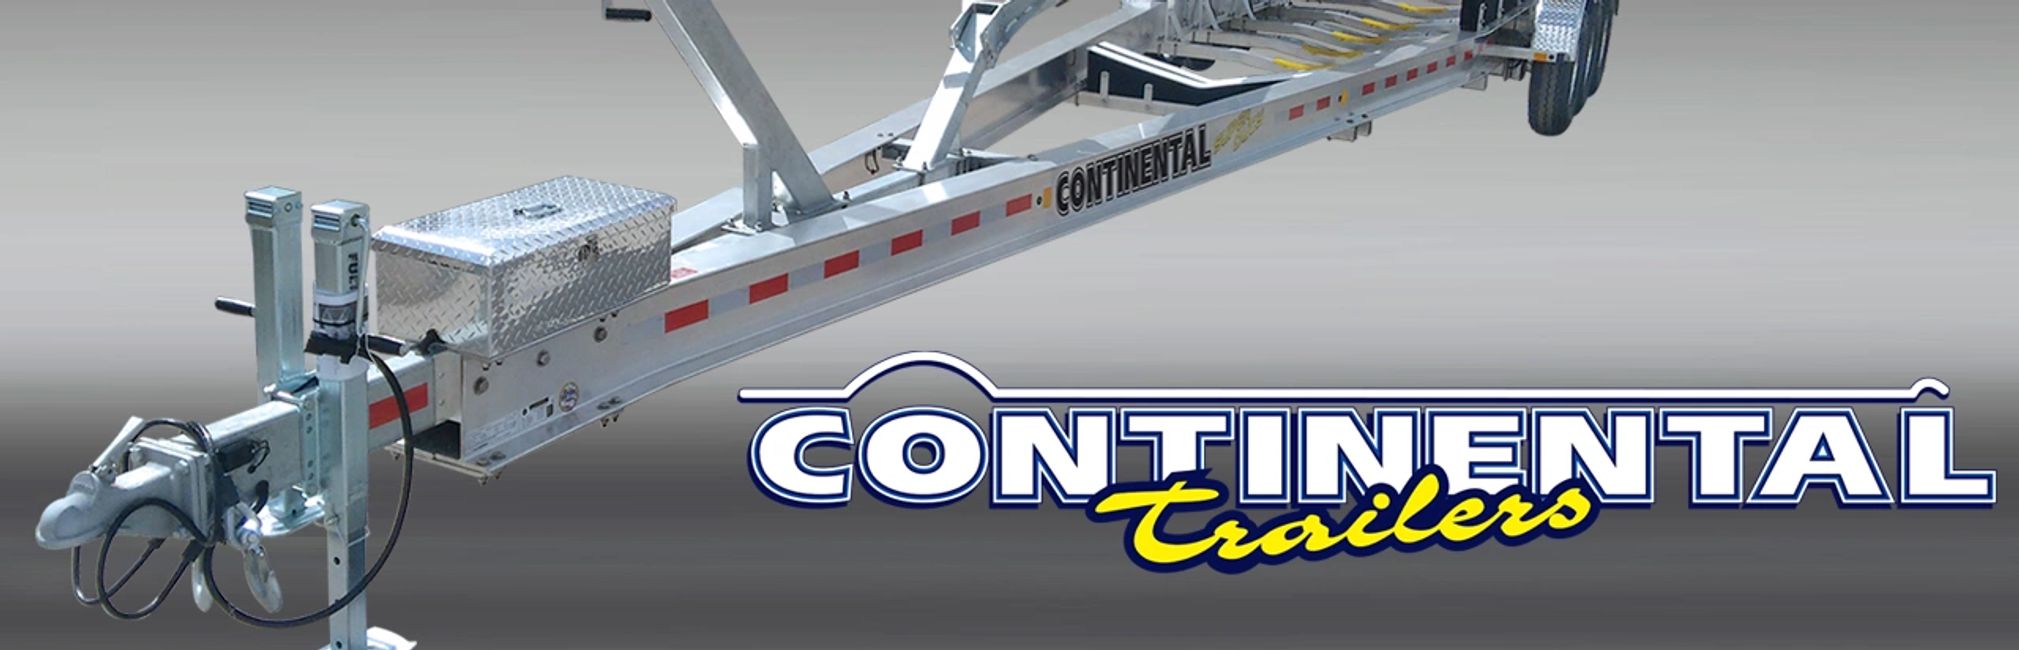 Continental Boat Trailers from 12' to 45' Boats